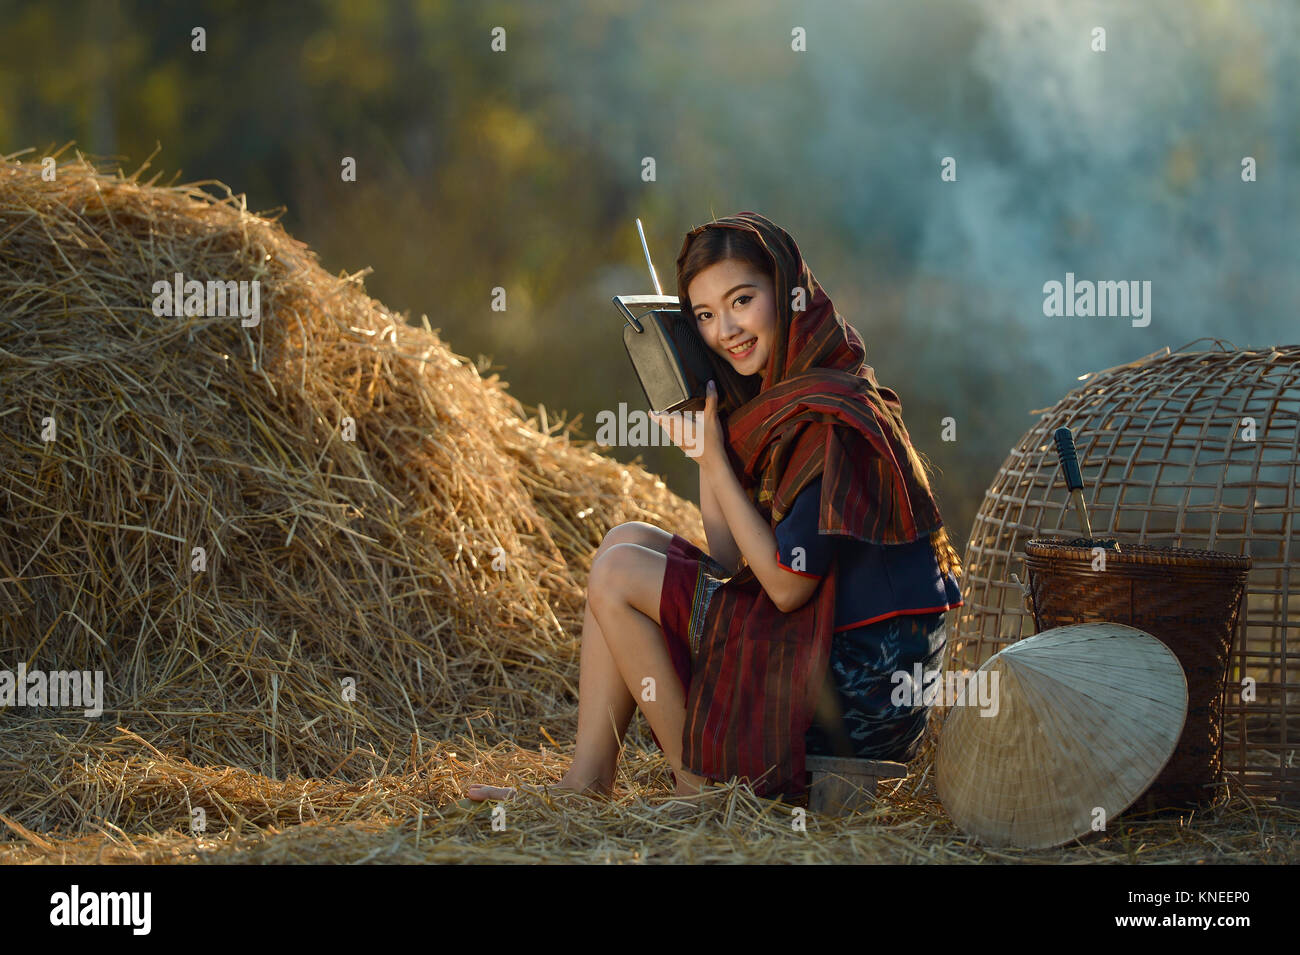 Woman sitting in a field listening to the radio, Thailand Stock Photo